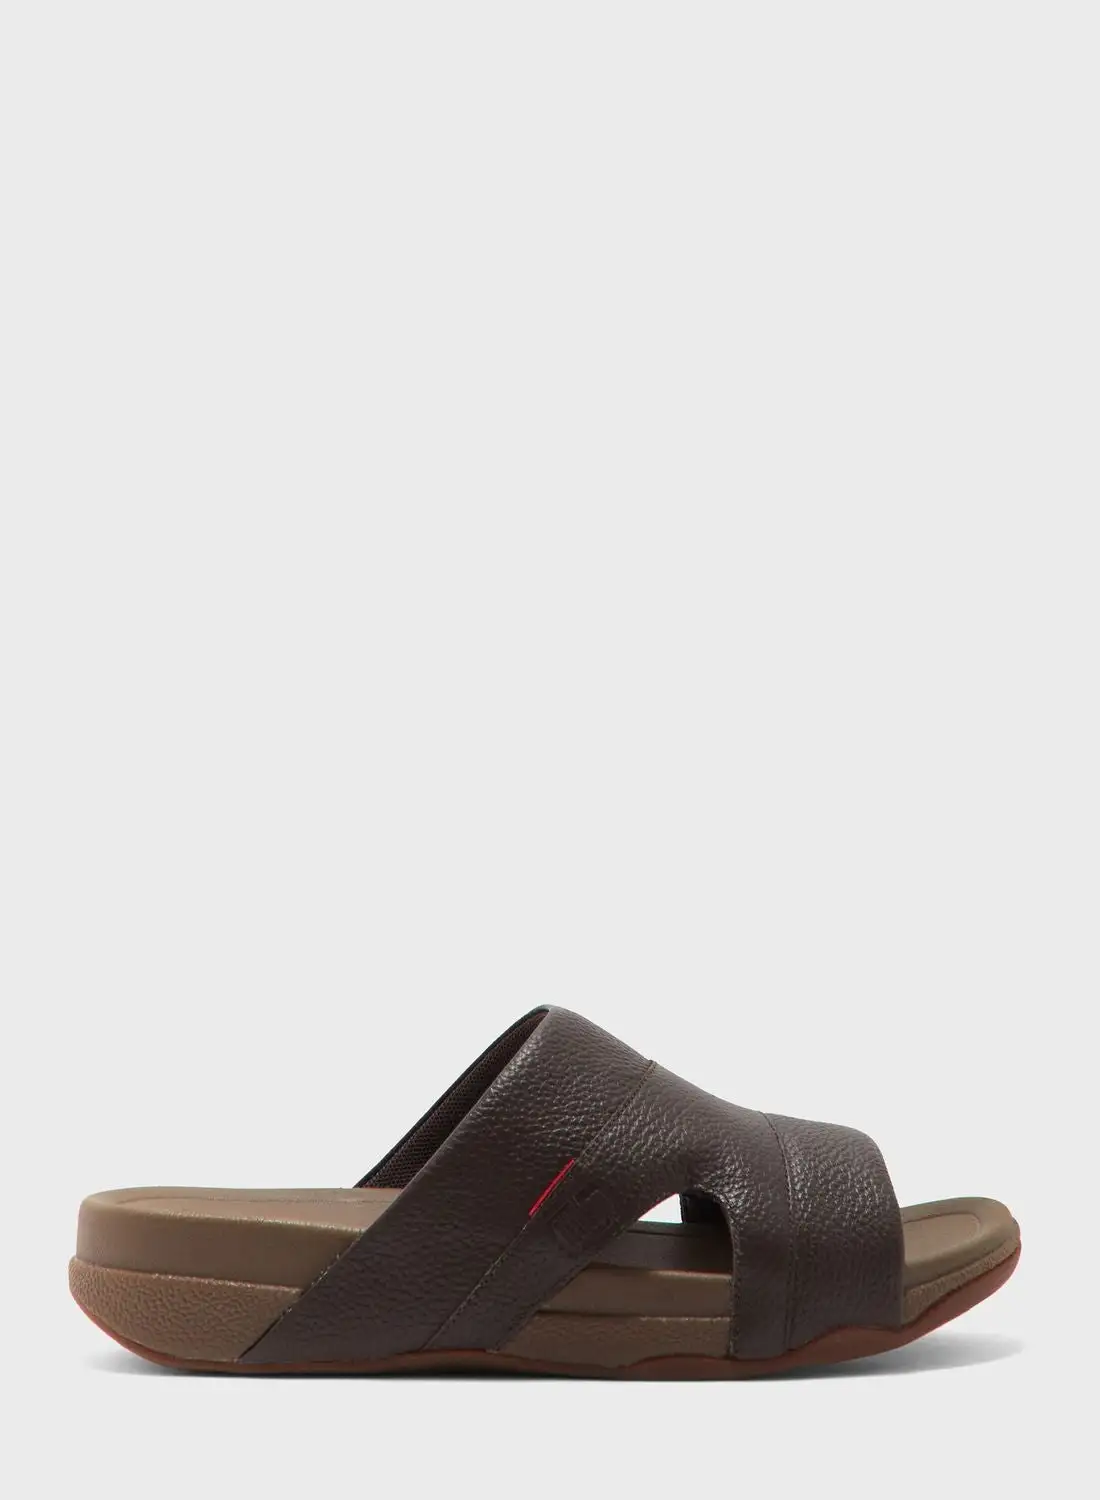 fitflop Gogh Moc Casual Slides